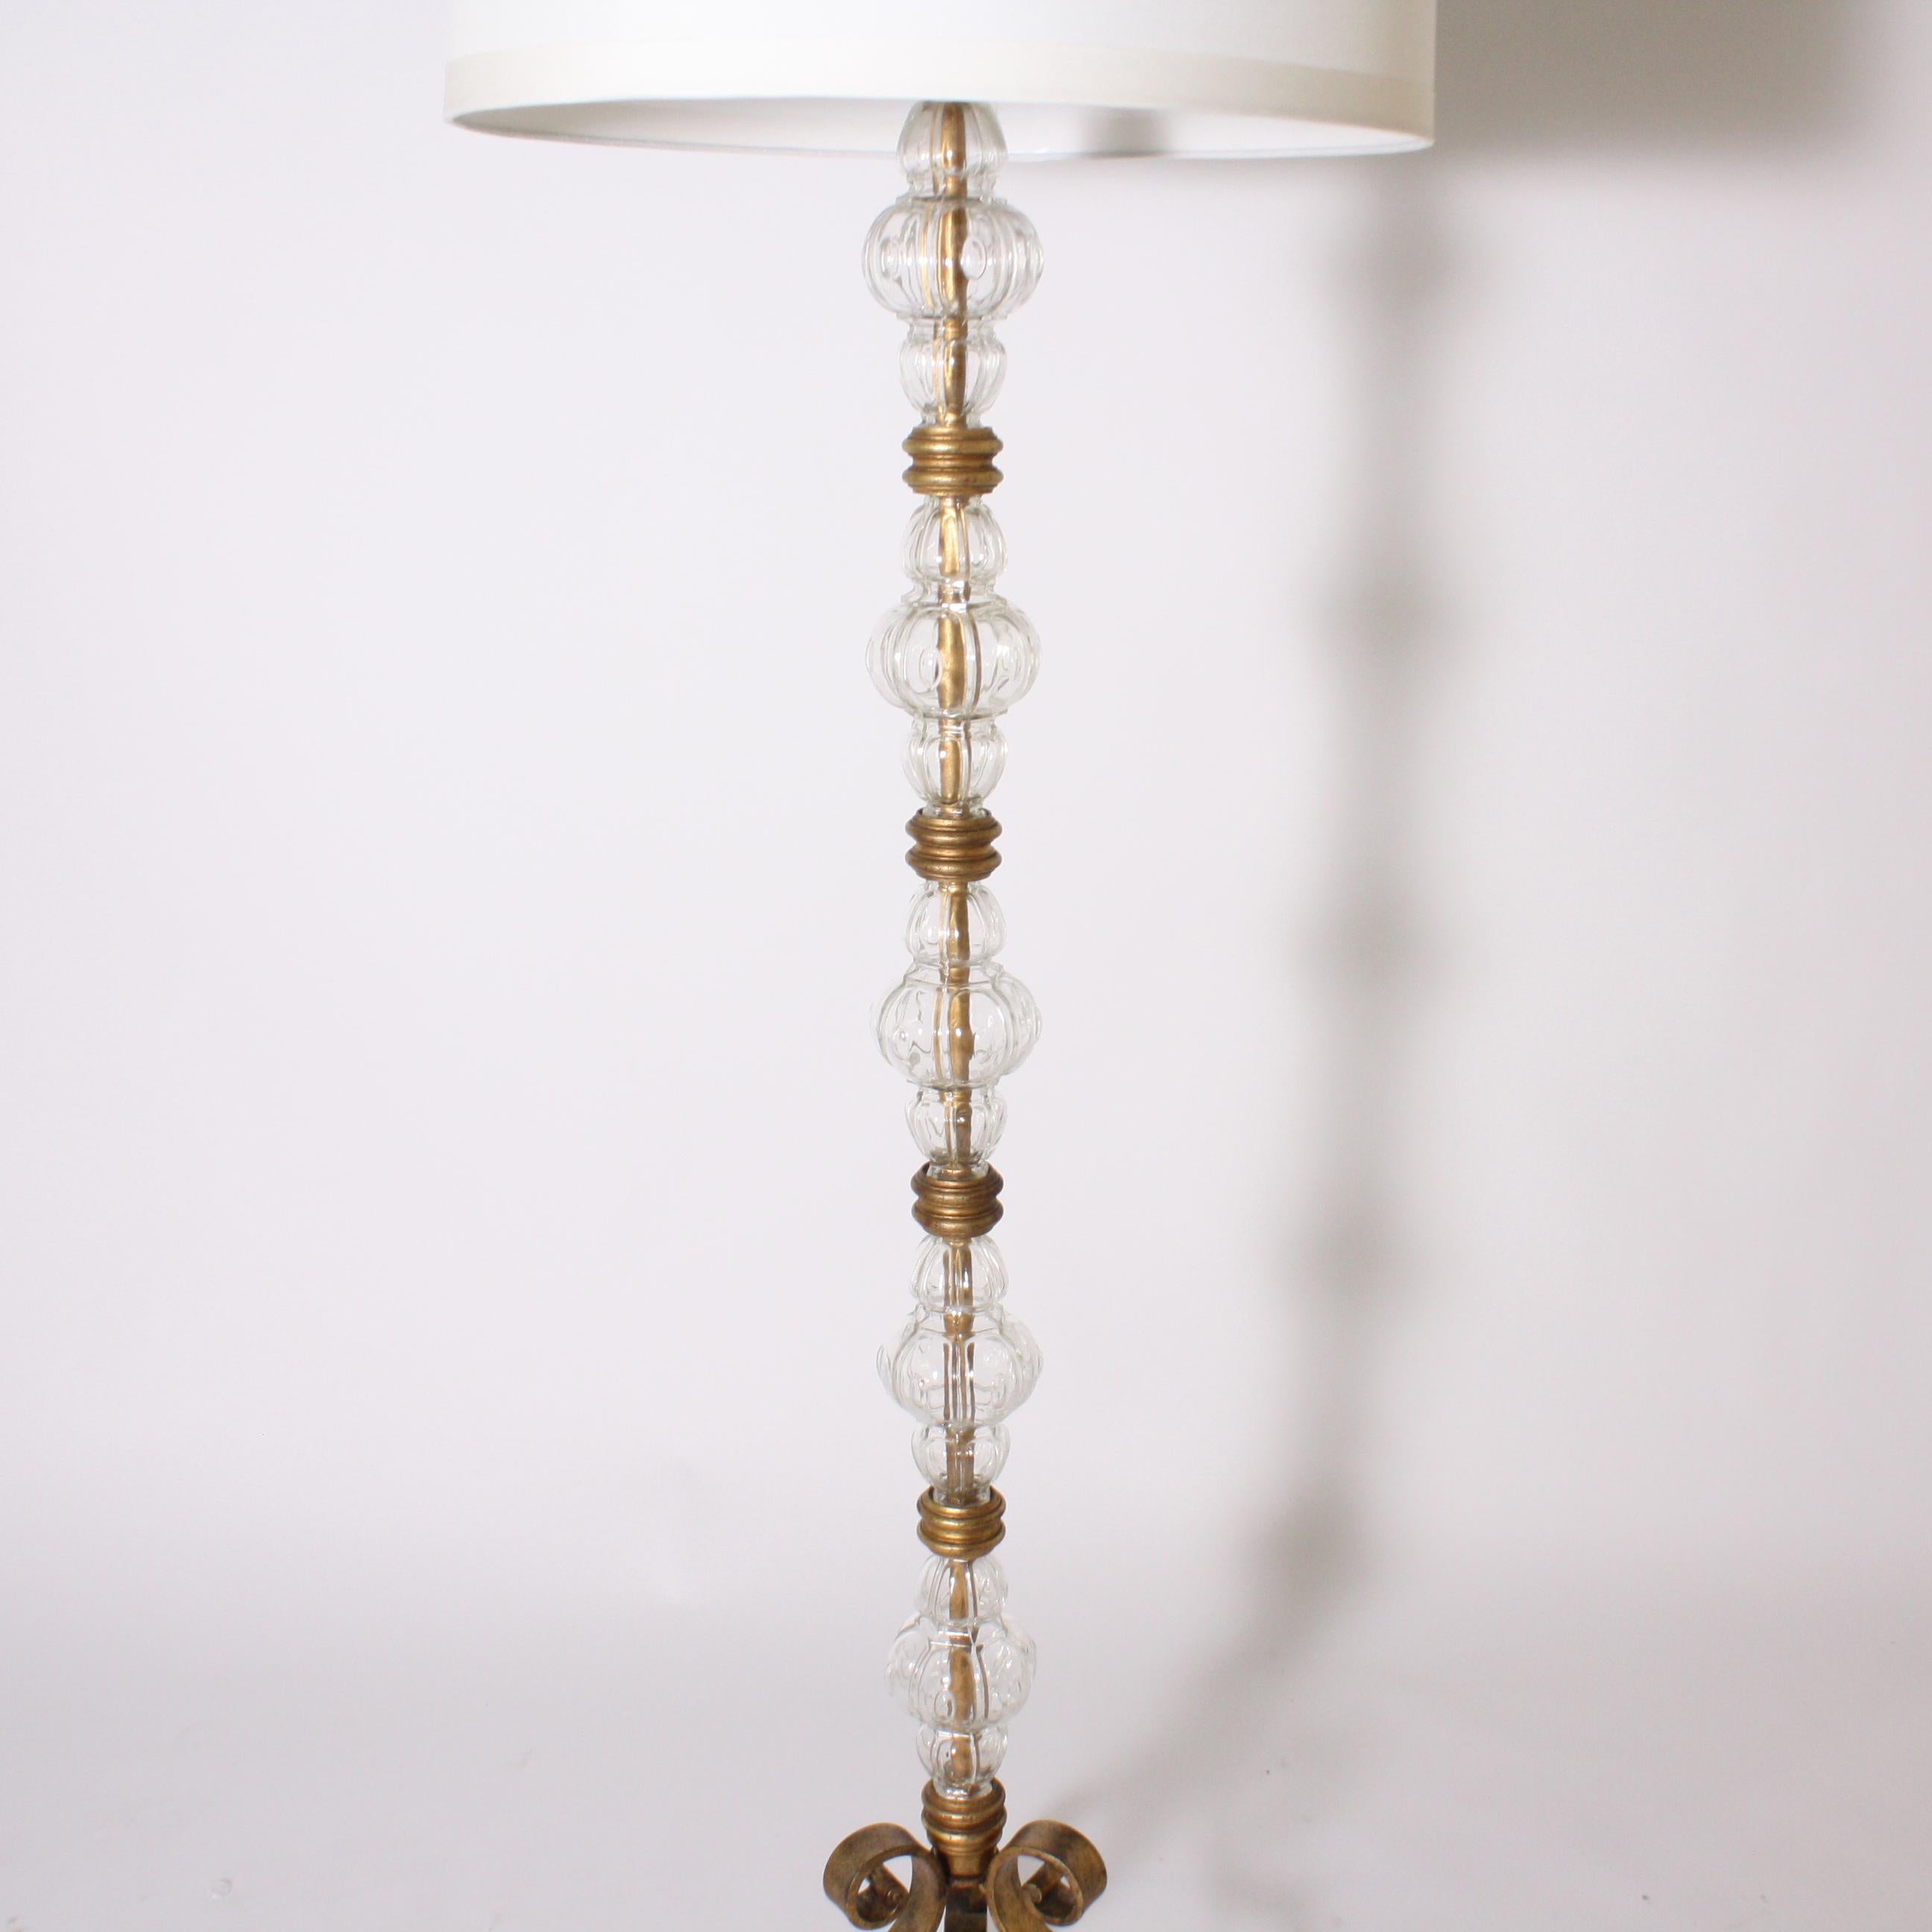 Glass and Metal Floor Lamp by Maison Jansen, circa 1940 In Good Condition For Sale In Dallas, TX